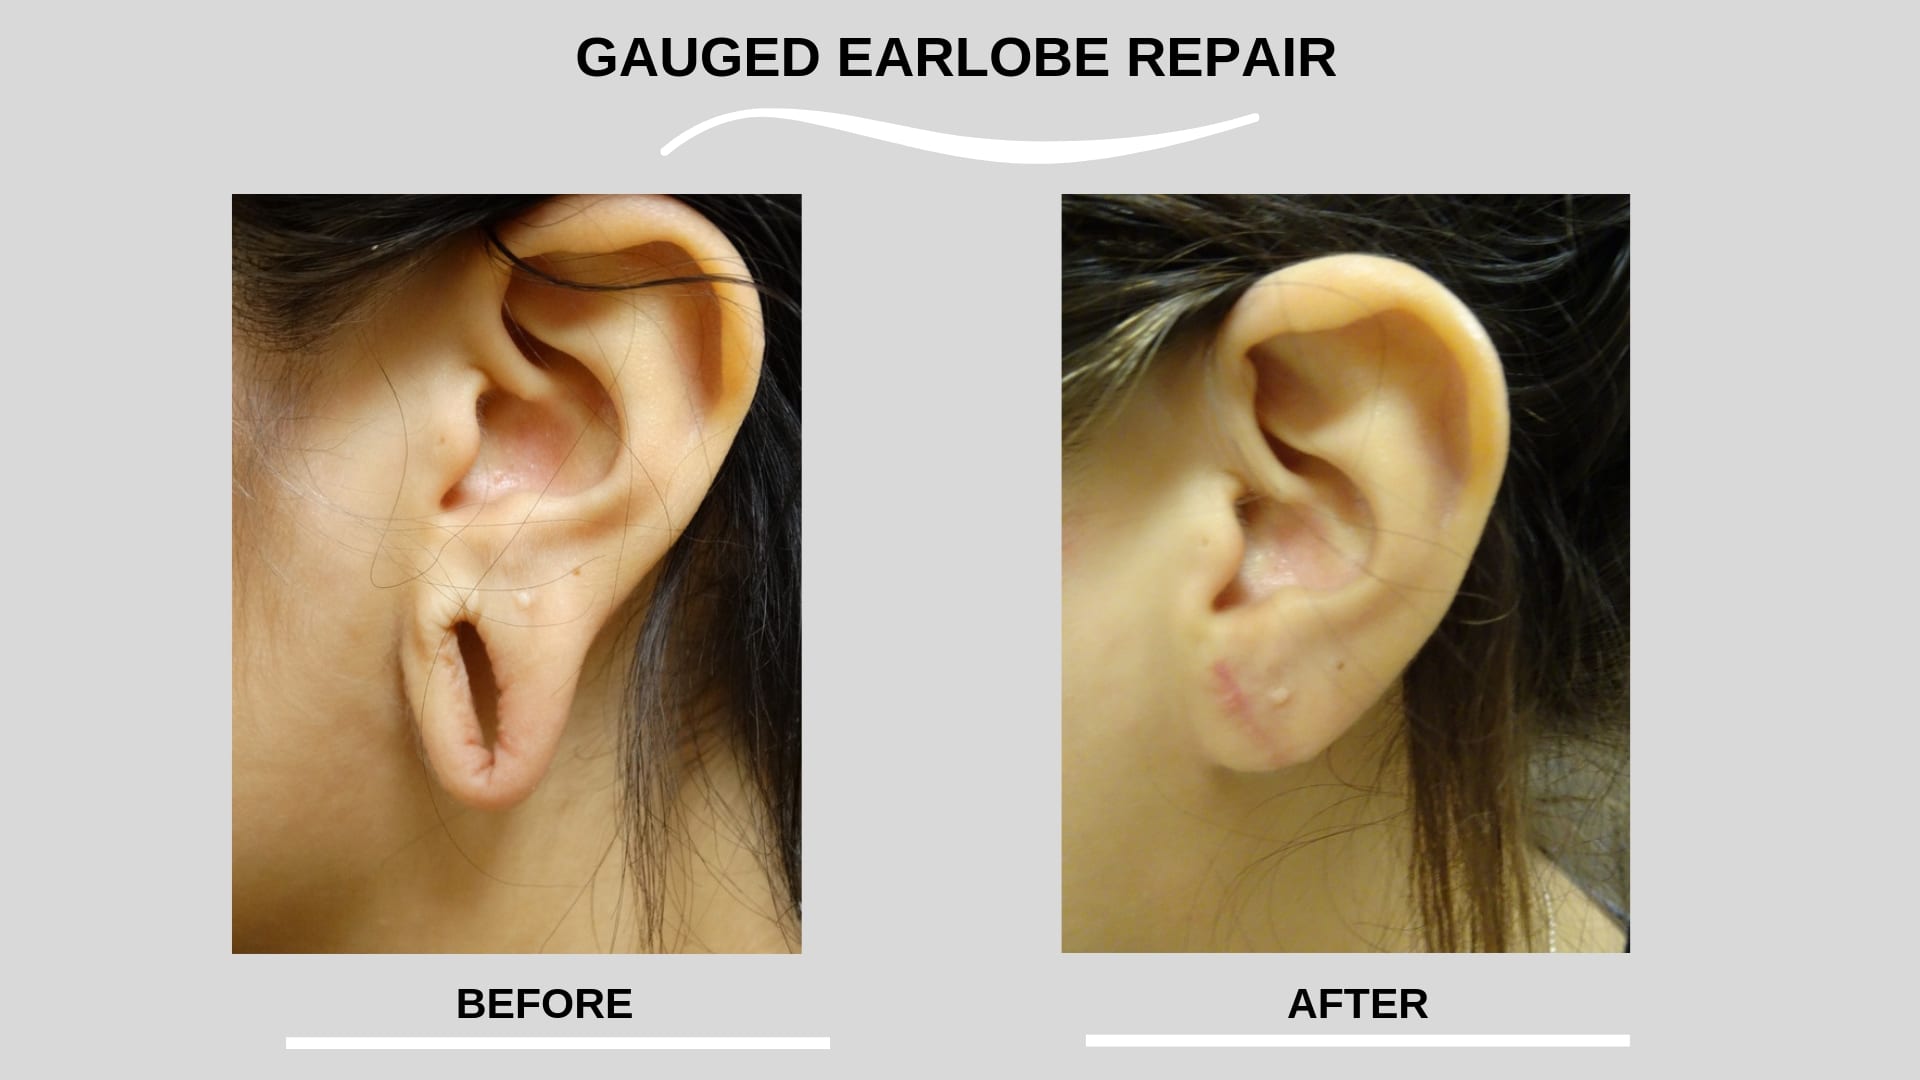 Repair Gauged Earlobes With Ear Surgery - Blogs by Ronald M